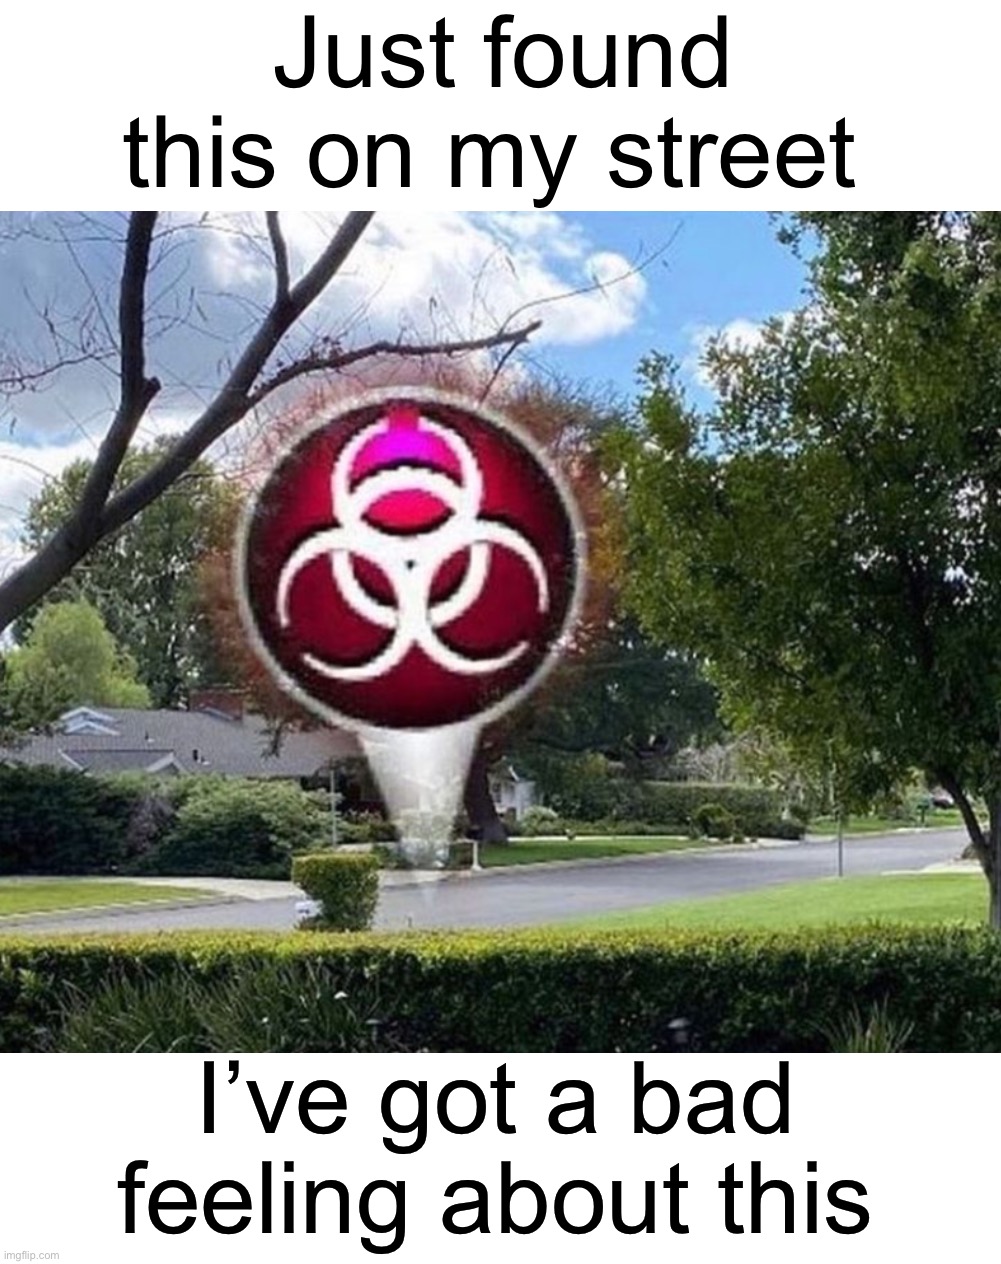 Bubonic plague 2.0 | Just found this on my street; I’ve got a bad feeling about this | image tagged in memes,funny,oh no,uh oh,oh crap,plague inc | made w/ Imgflip meme maker